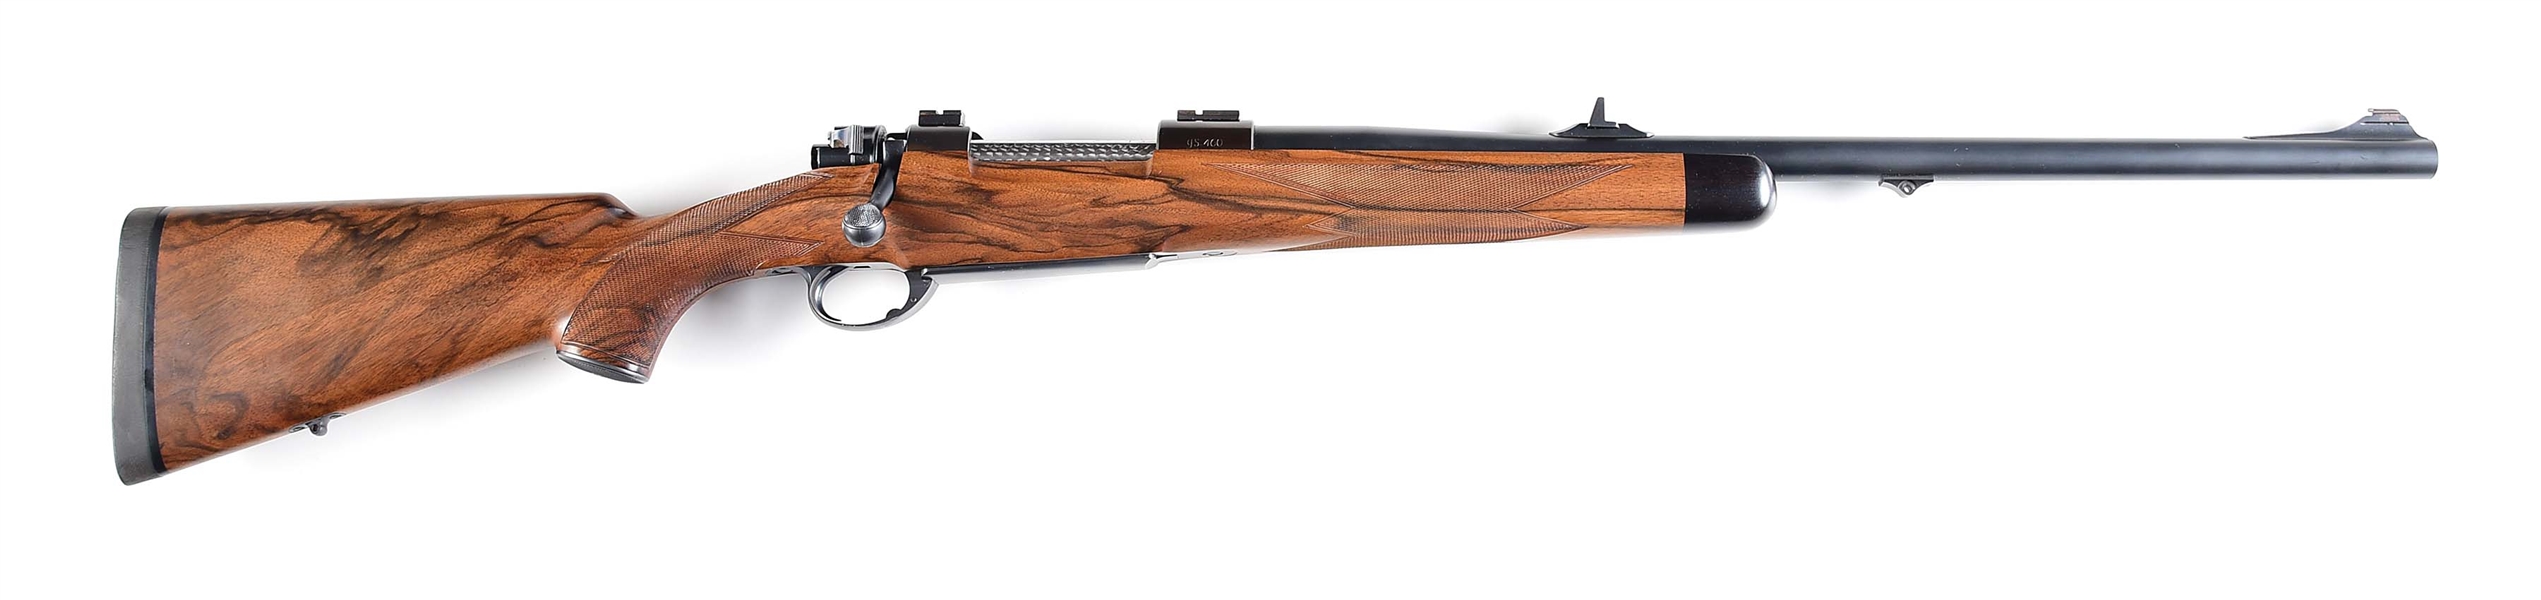 (M) G&A BOLT ACTION RIFLE IN .460 G&A.